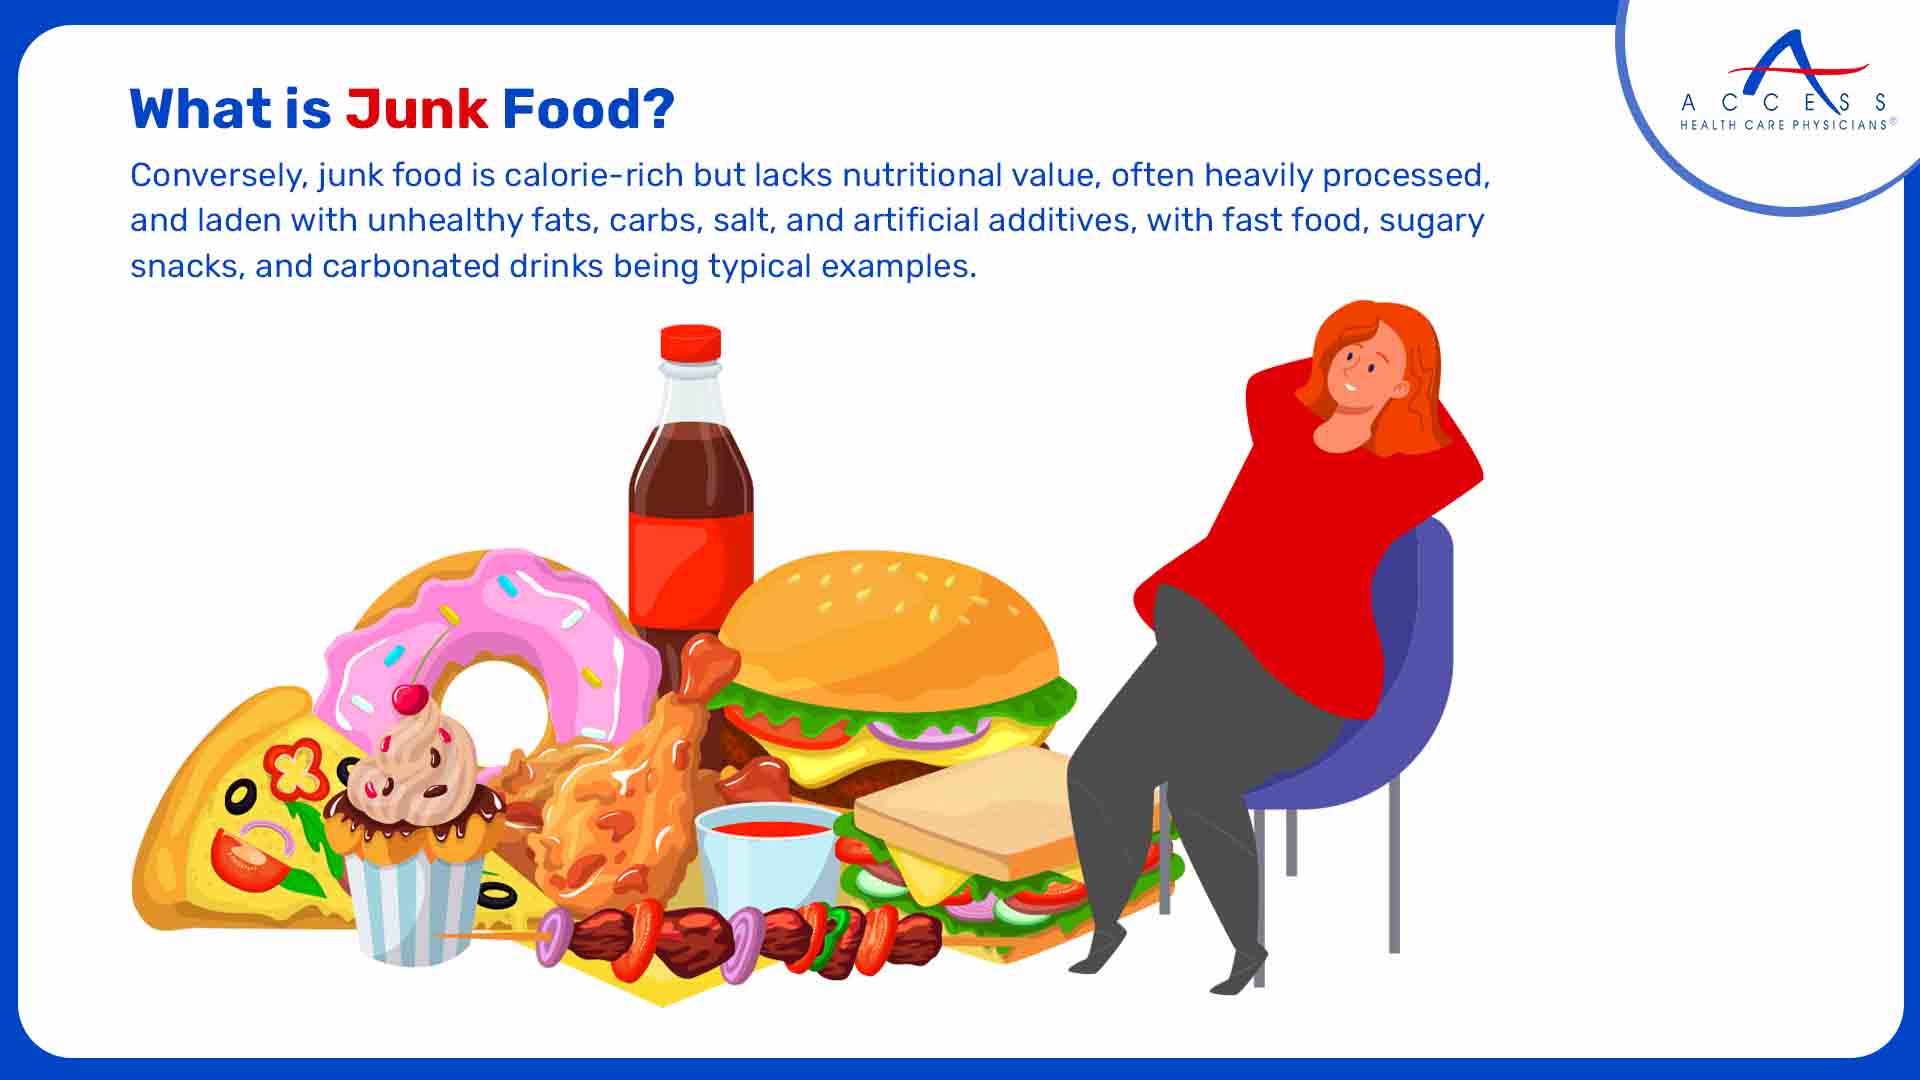 What is Junk Food?